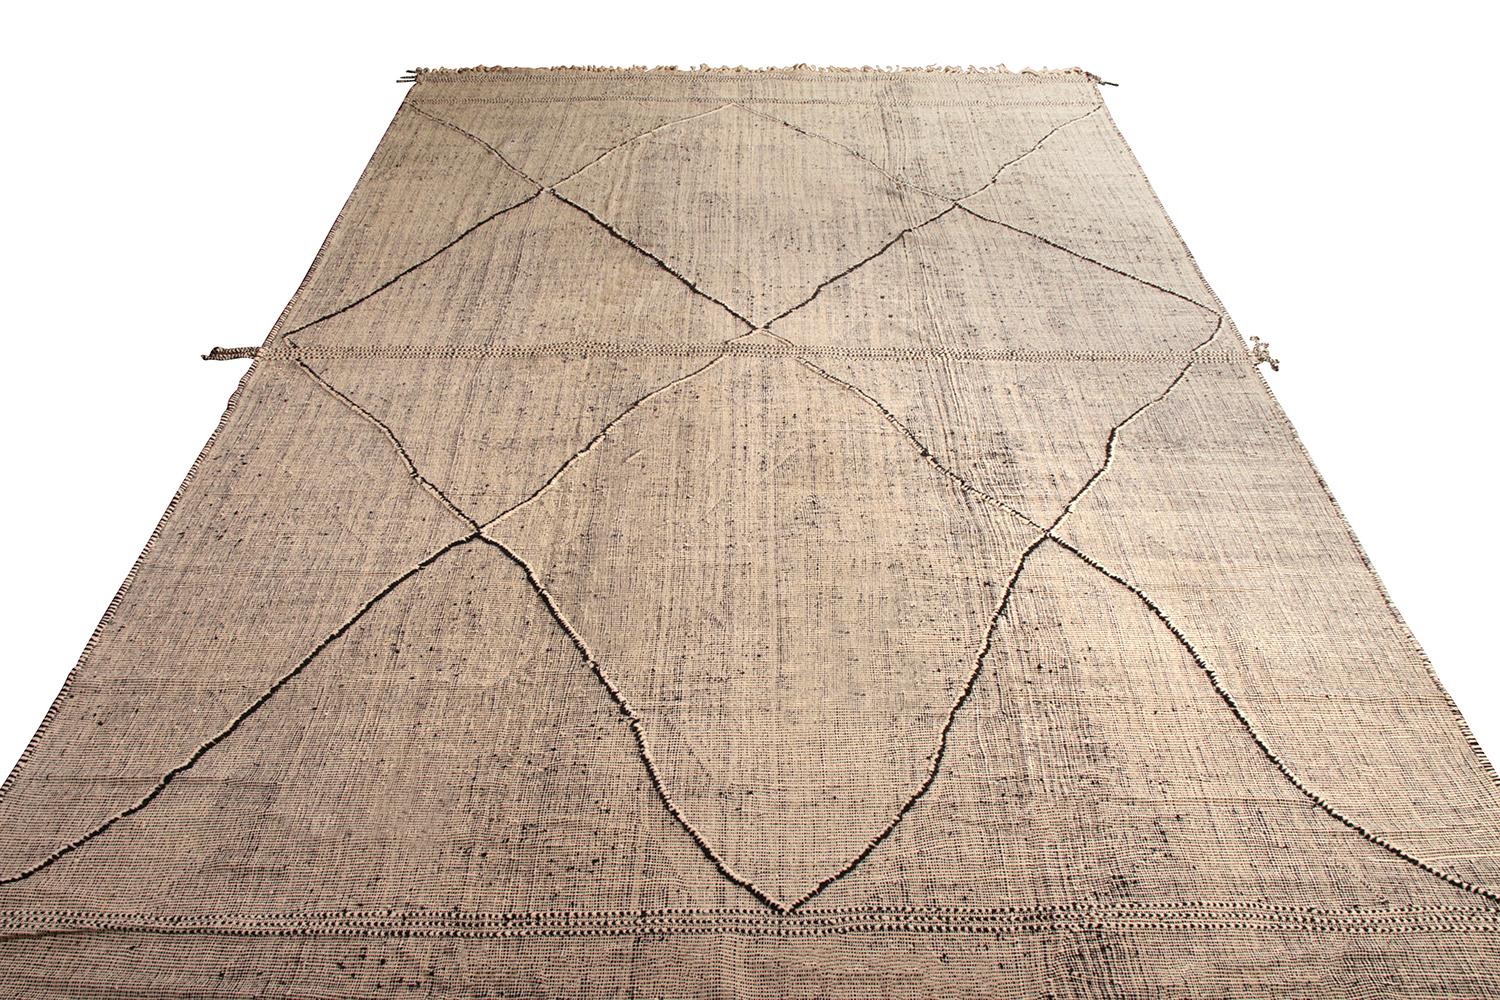 Handwoven in wool at a jaw dropping palace sized 13 x 20, this Moroccan Kilim rug is among the rare large-sized modern pieces from Rug & Kilim. The thoughtful blend of positive negative in white and black lends an almost gray-reading hue that